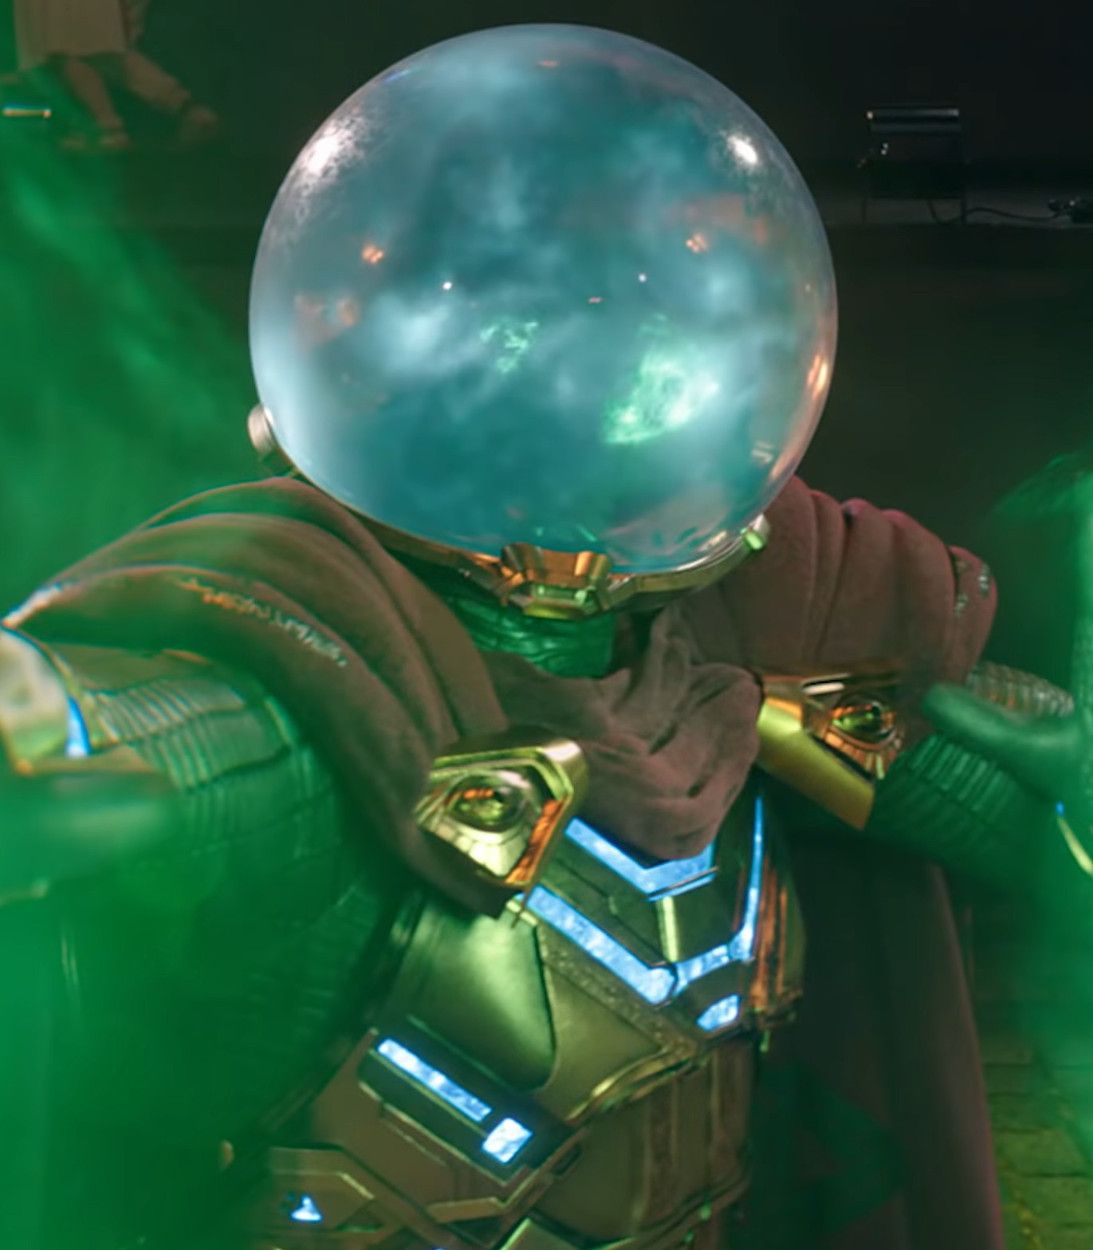 Jake Gyllenhaal As Mysterio In Spider-Man Far From Home